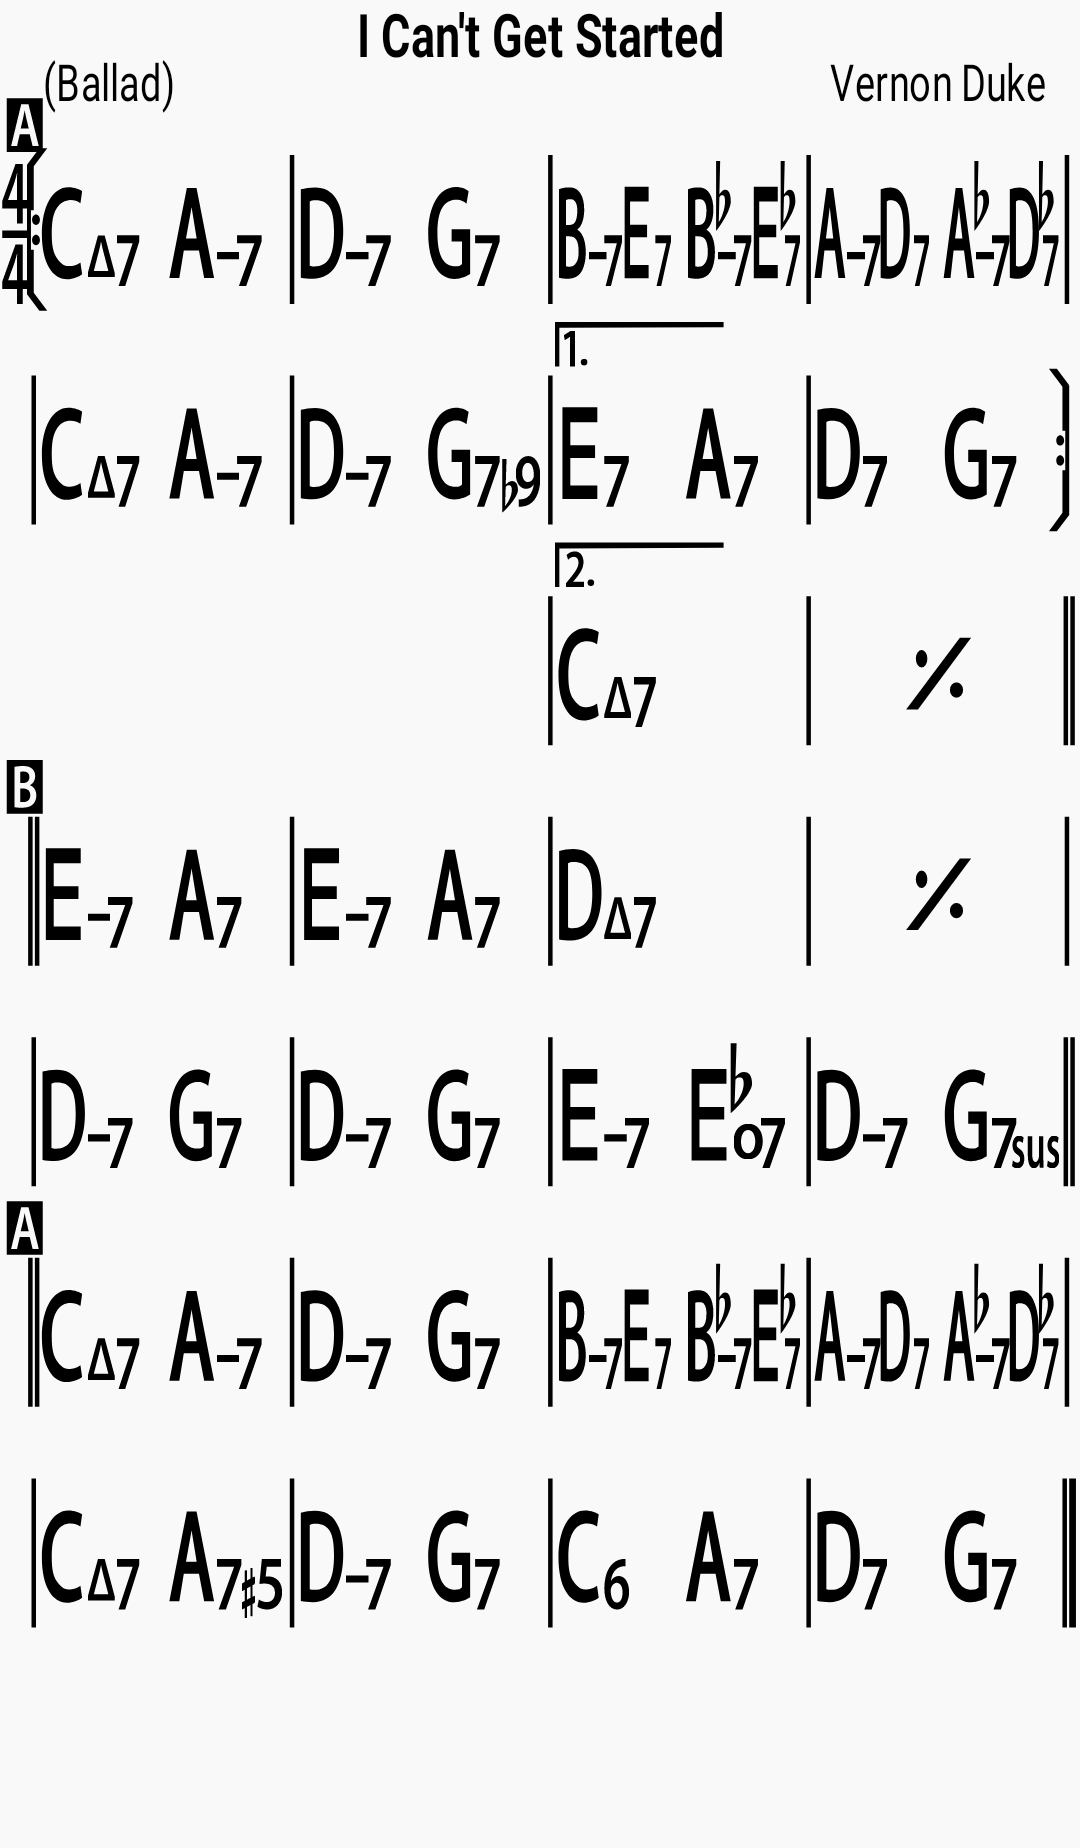 Chord chart for the jazz standard I Can't Get Started